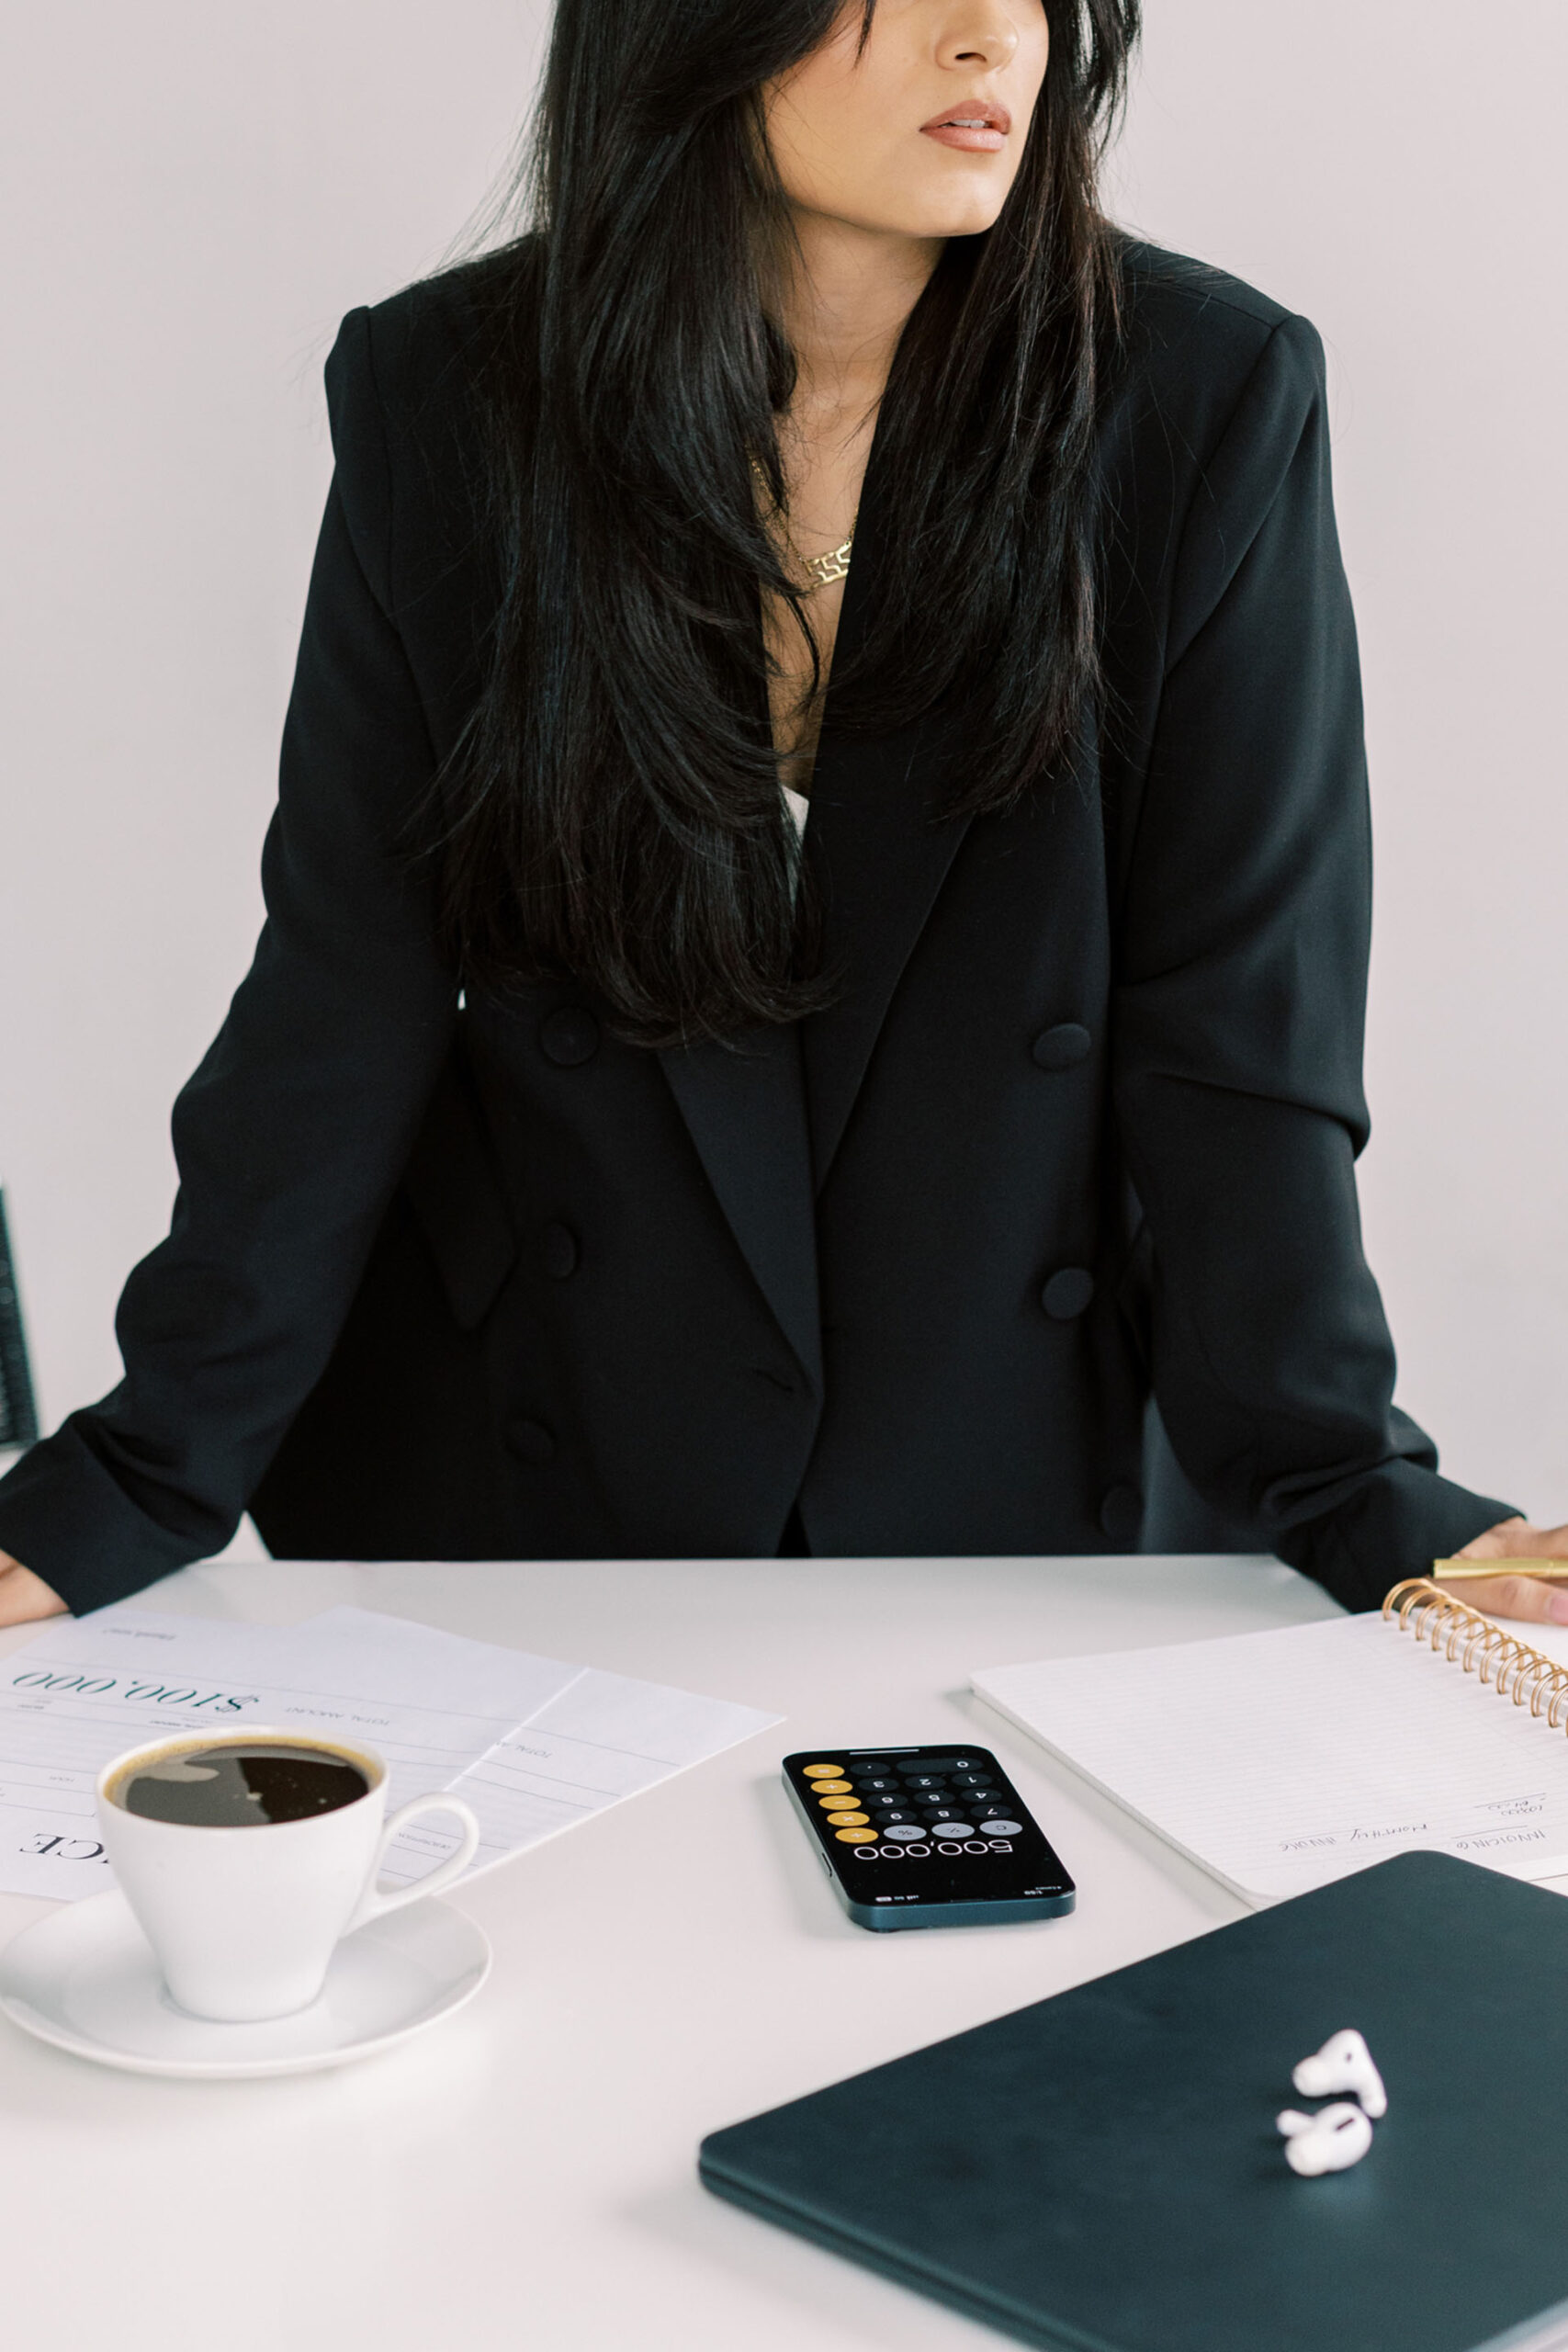 A woman wearing a black blazer, leaning against a desk, deep in thought. On the desk there is a cup of black coffee, calculator, and apple airpods